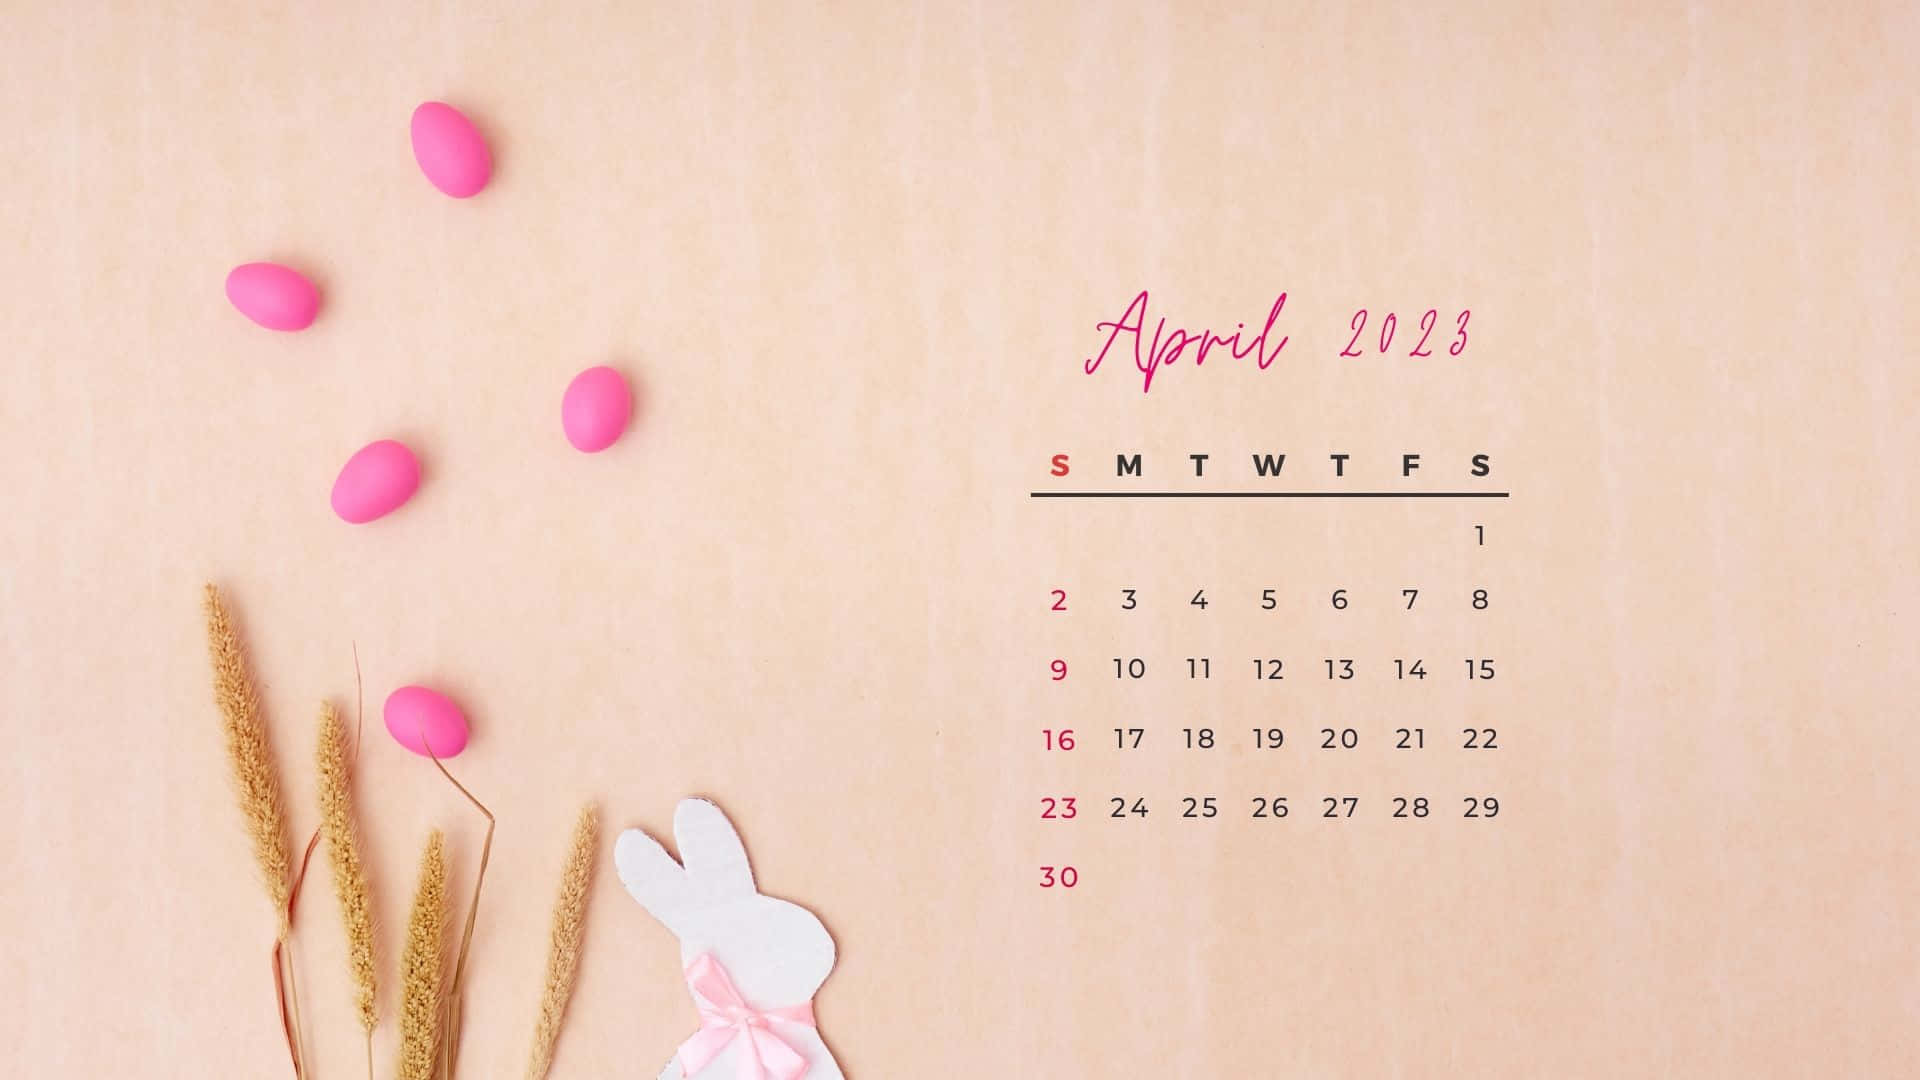 A Calendar With Bunnies And Eggs On A Wooden Background Wallpaper